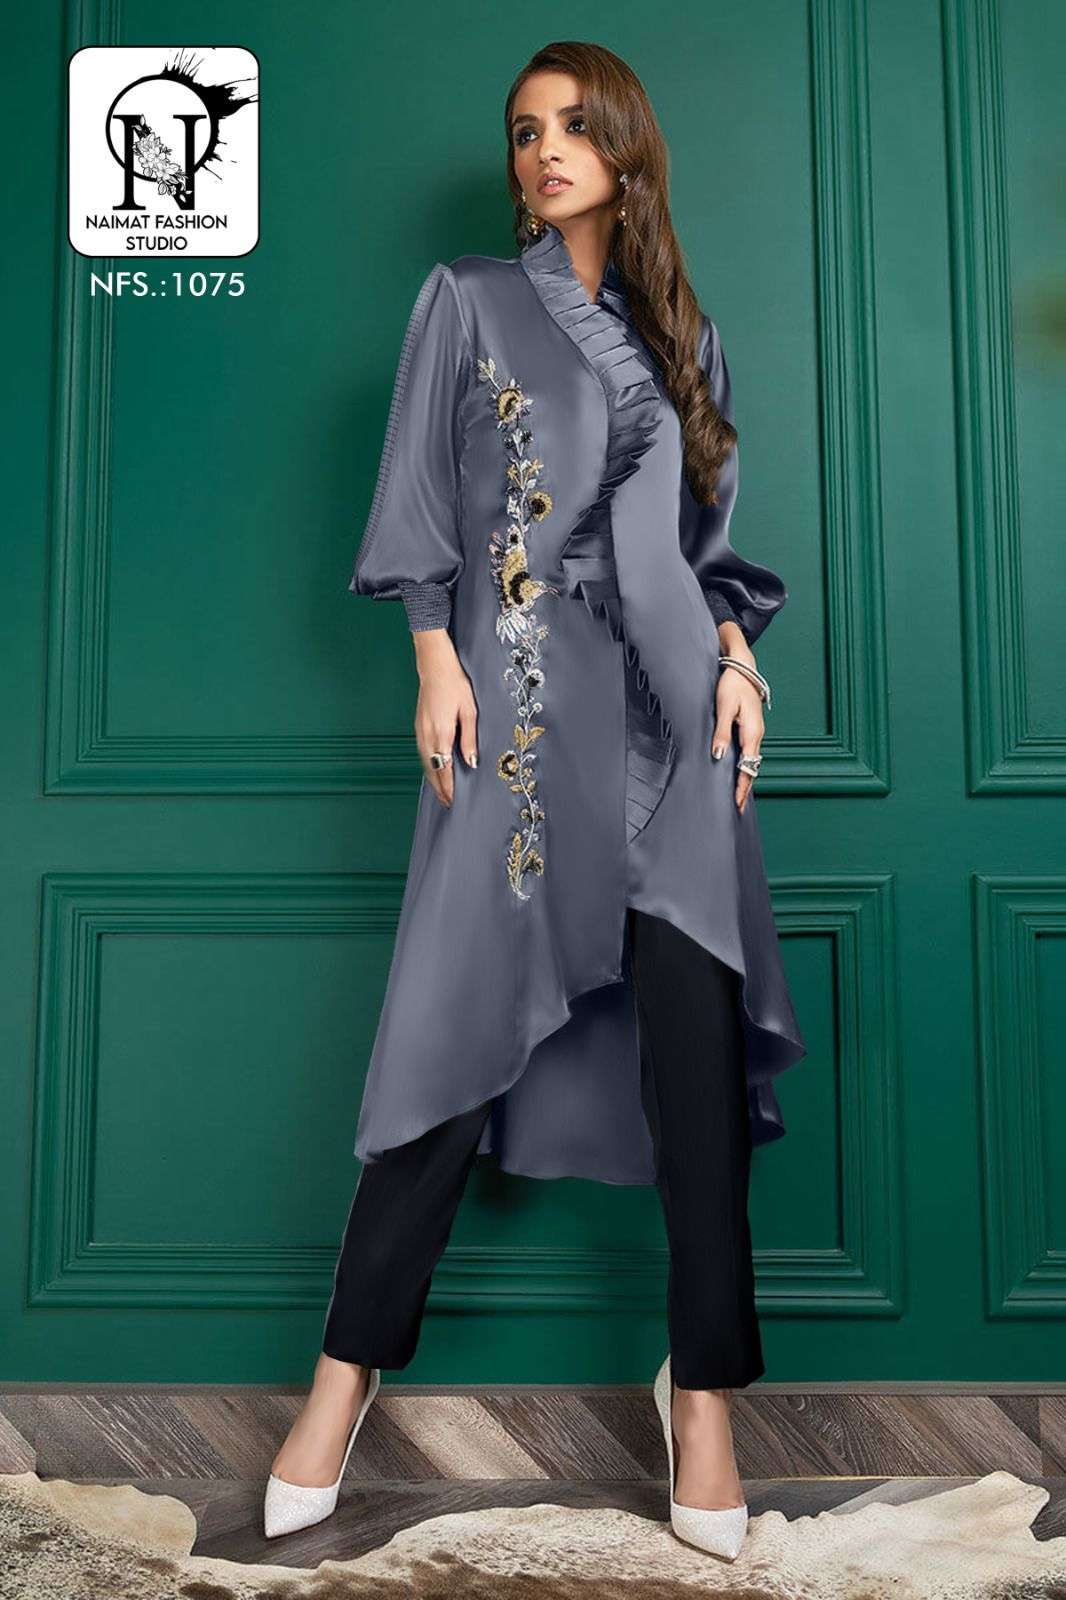 Naimat 1075 designer imported top and bottom